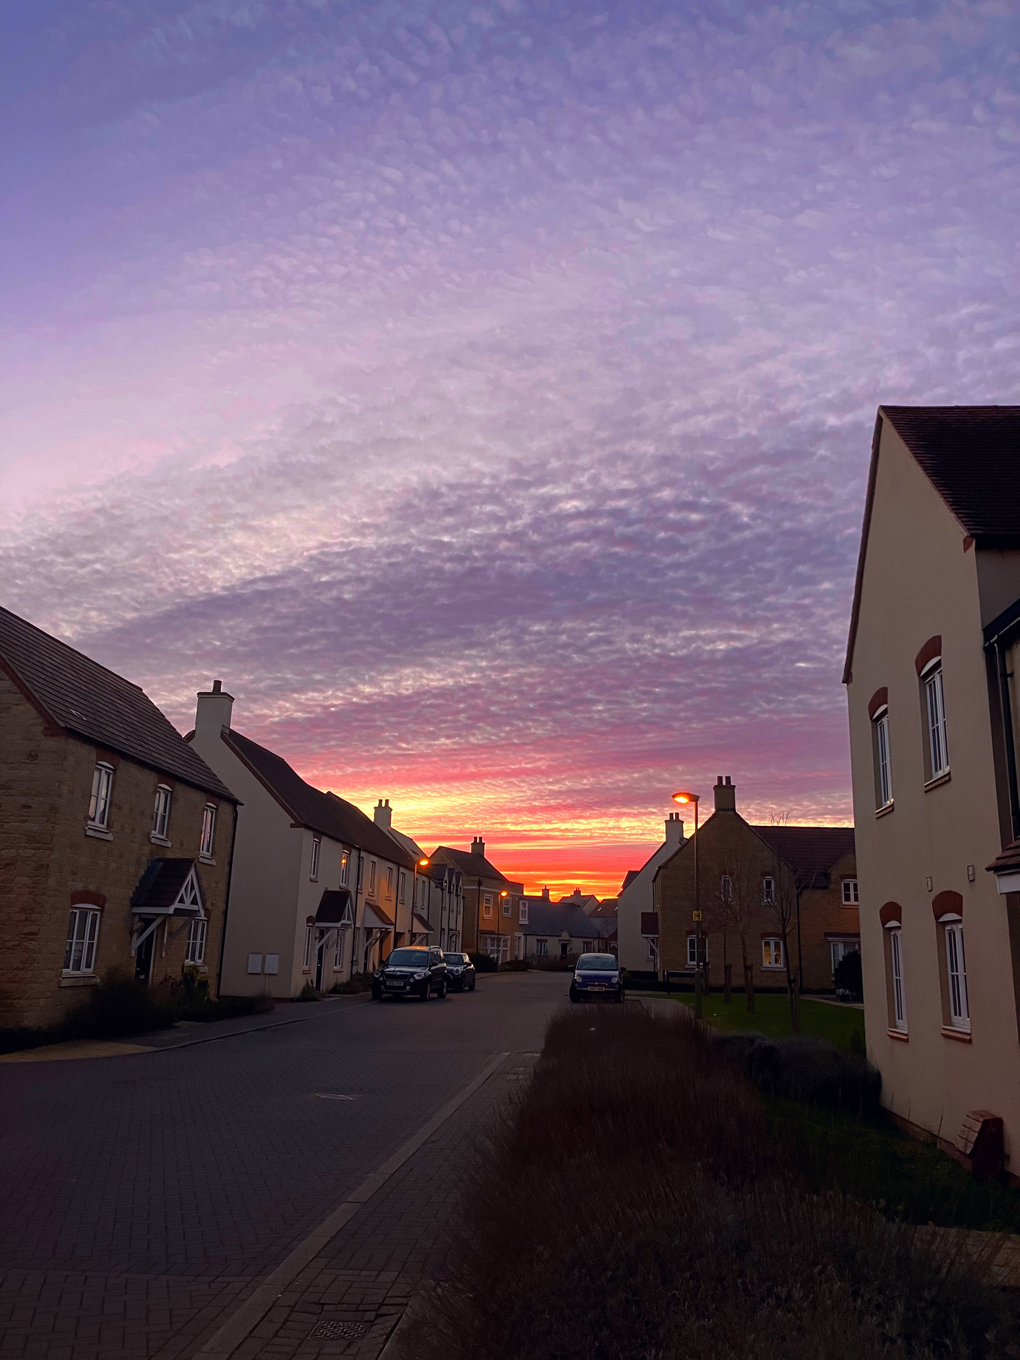 Photo taken at the end of my road, with a sky that looks like it's on fire, beautiful reds, oranges and even some purples.